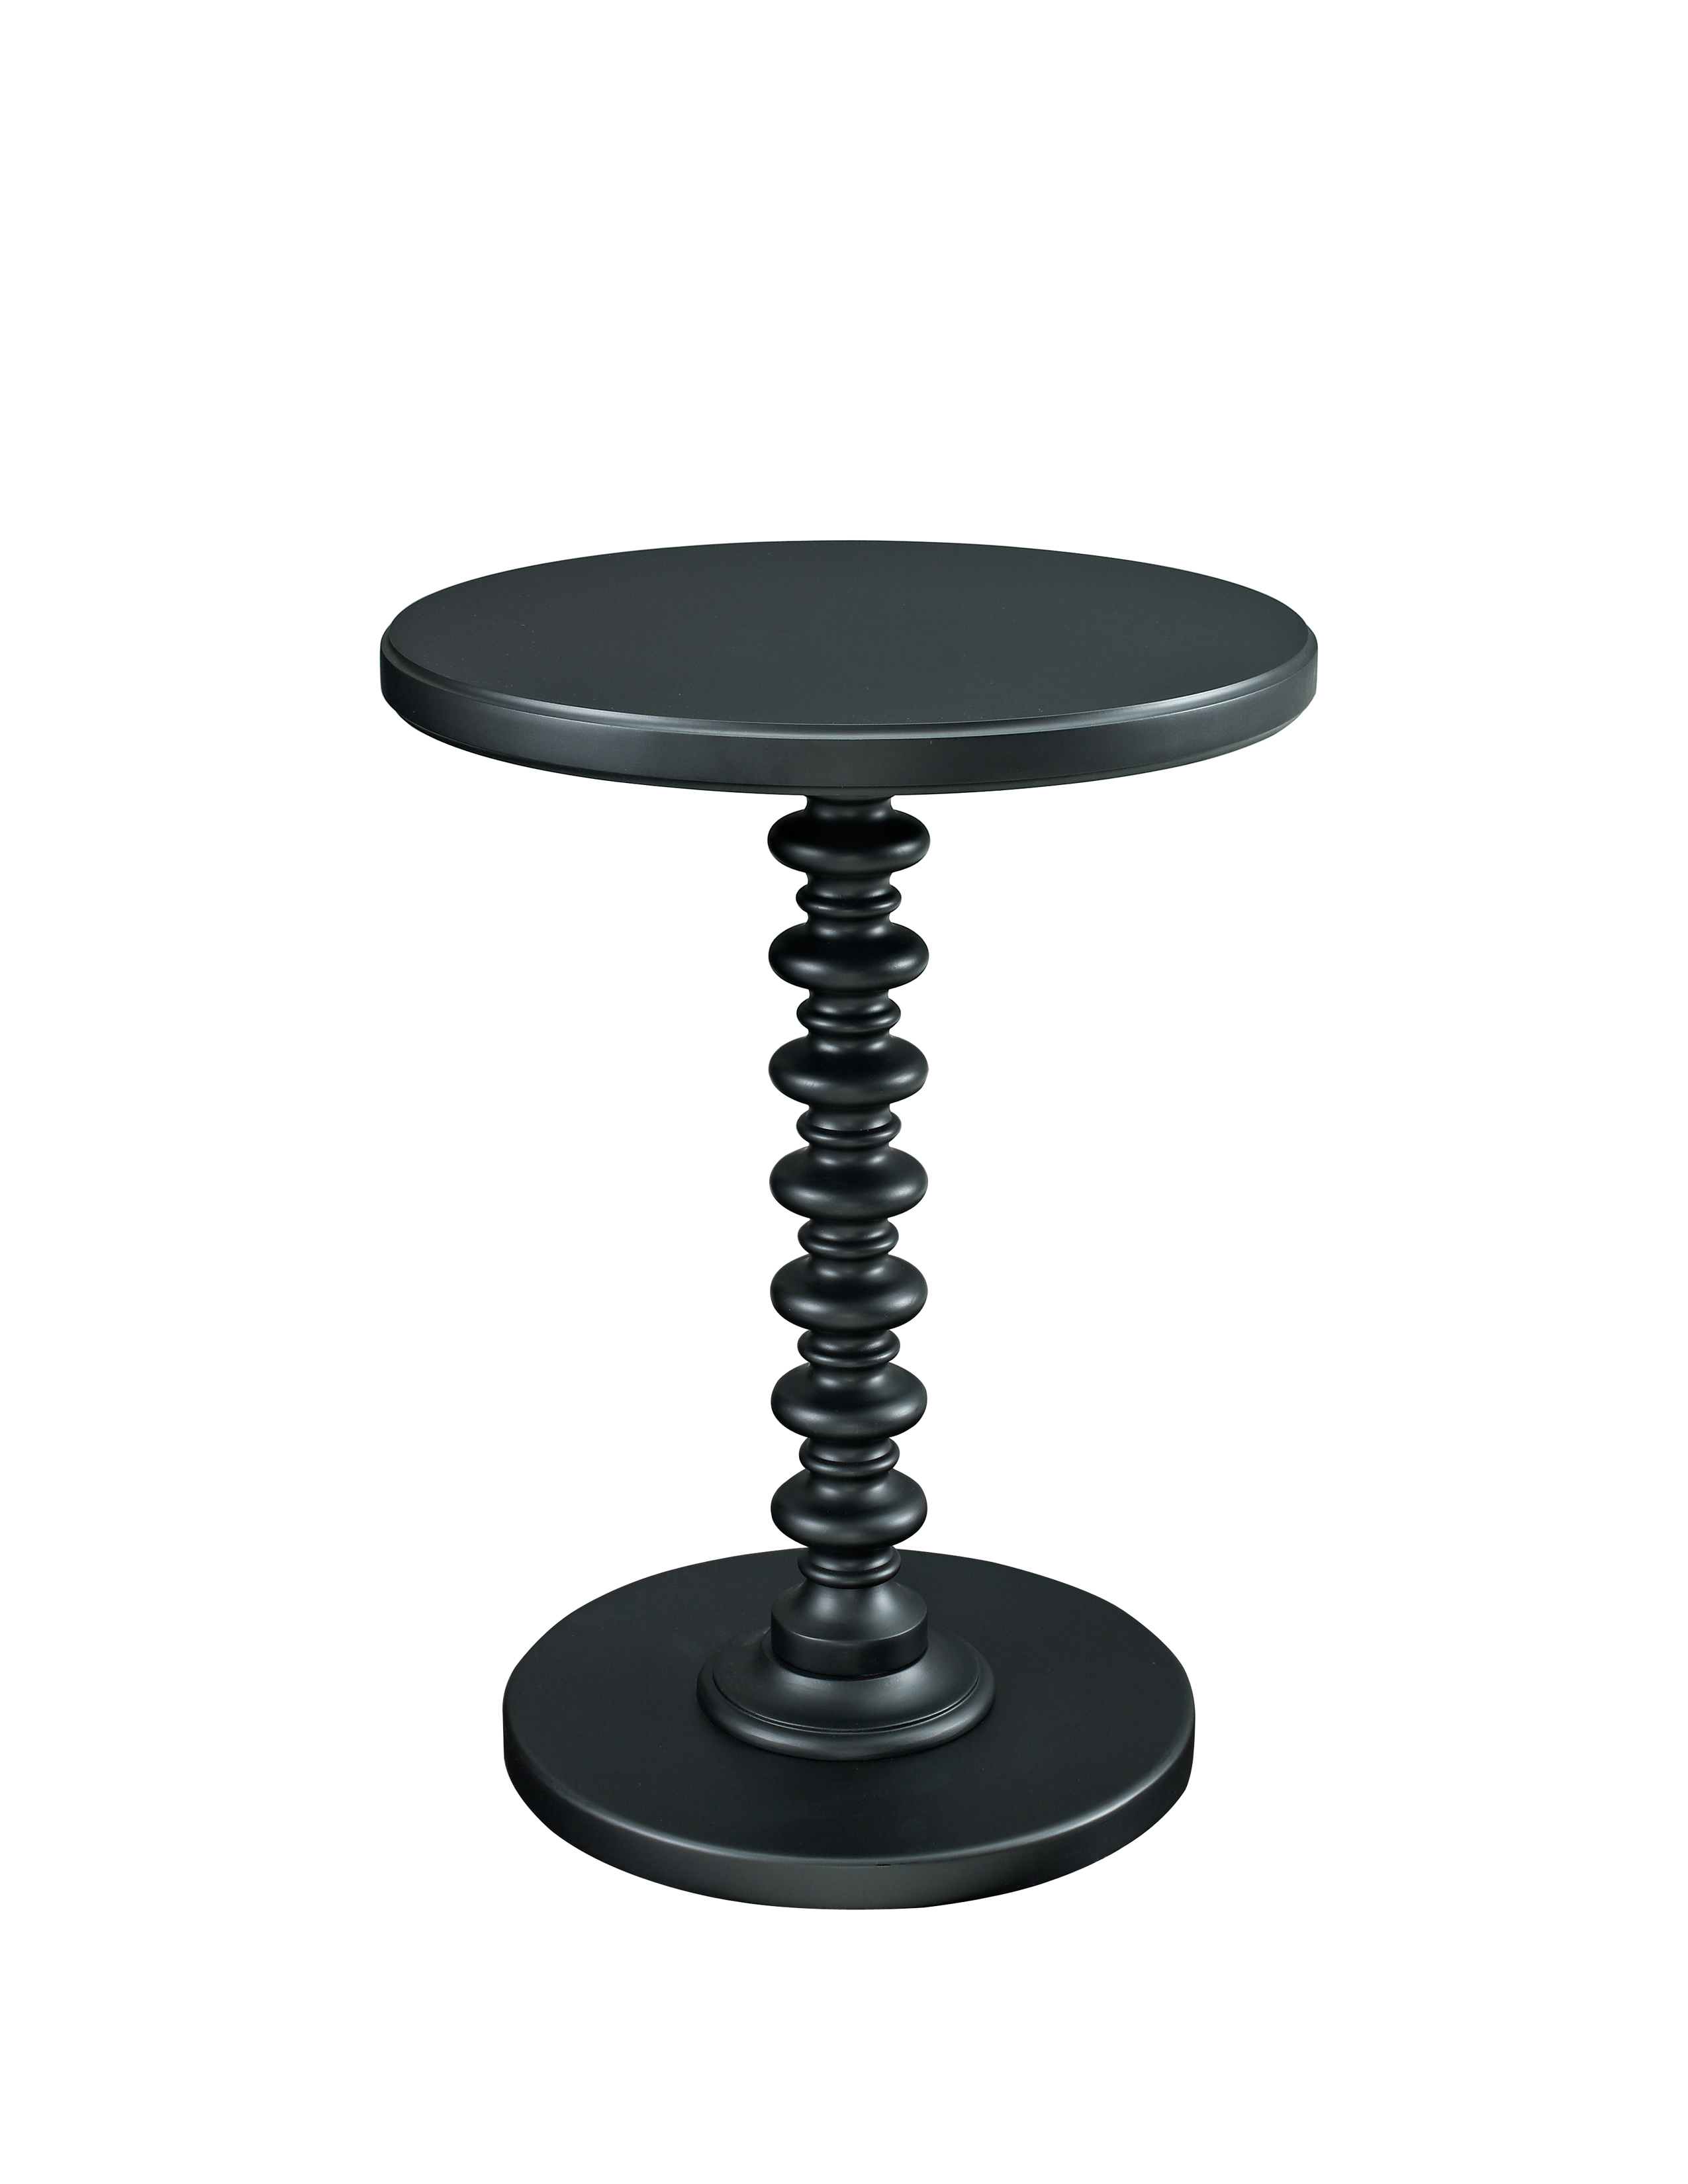 L Powell Black Round Spindle Table